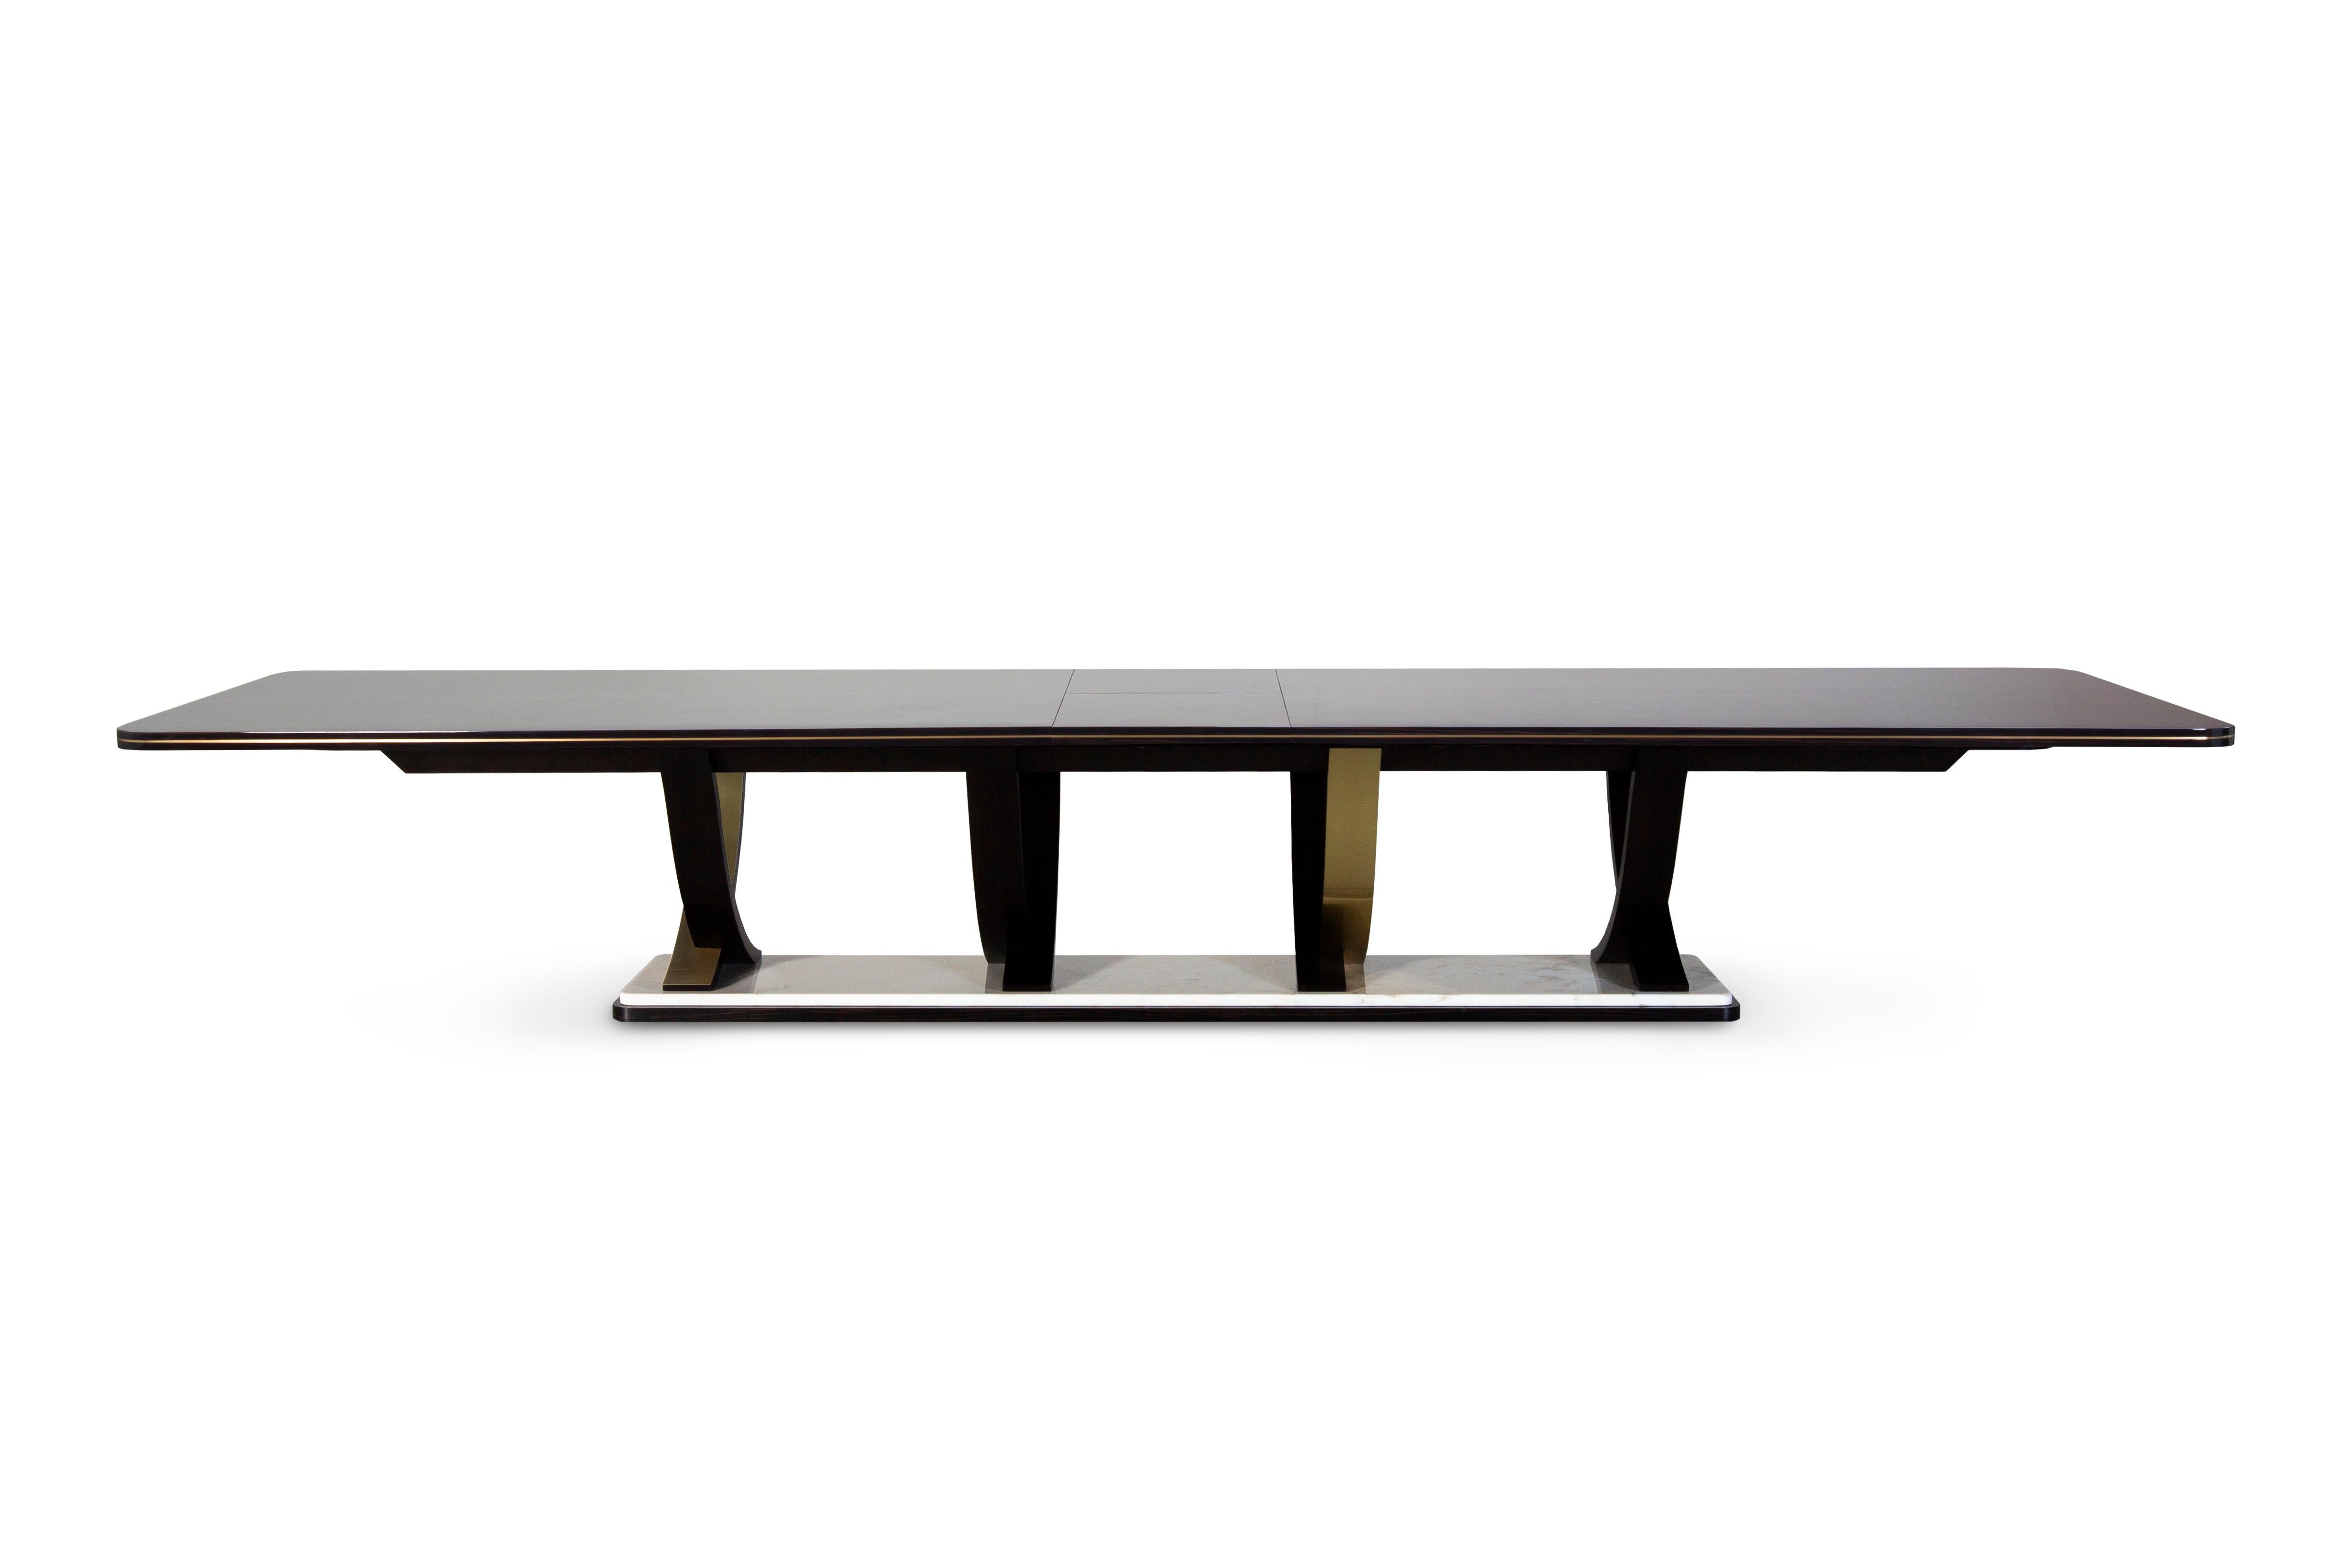 Extendable dining table fontaine by Green Apple
Dimensions: H 75 x W 400 x D 120 cm
Materials: ebony veneer, brass, beech, marble.

Extendable dining table top in Macassar ebony veneer with inlaid edging in brushed brass, both with high-gloss